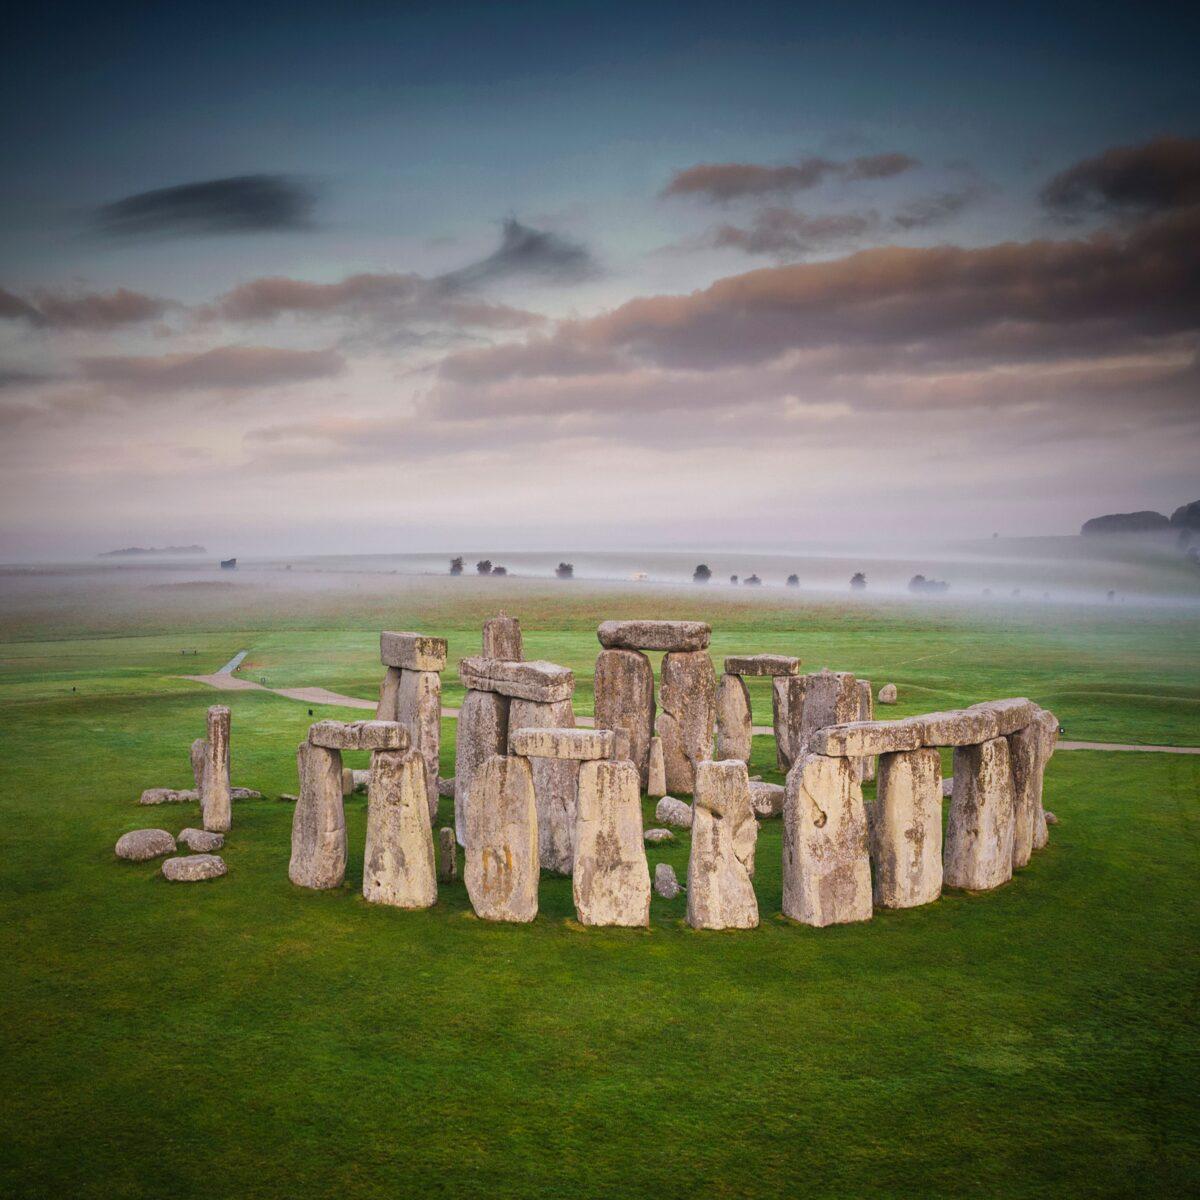 Overview of Stonehenge. Image credit (Andre Pattenden/ English Heritage)